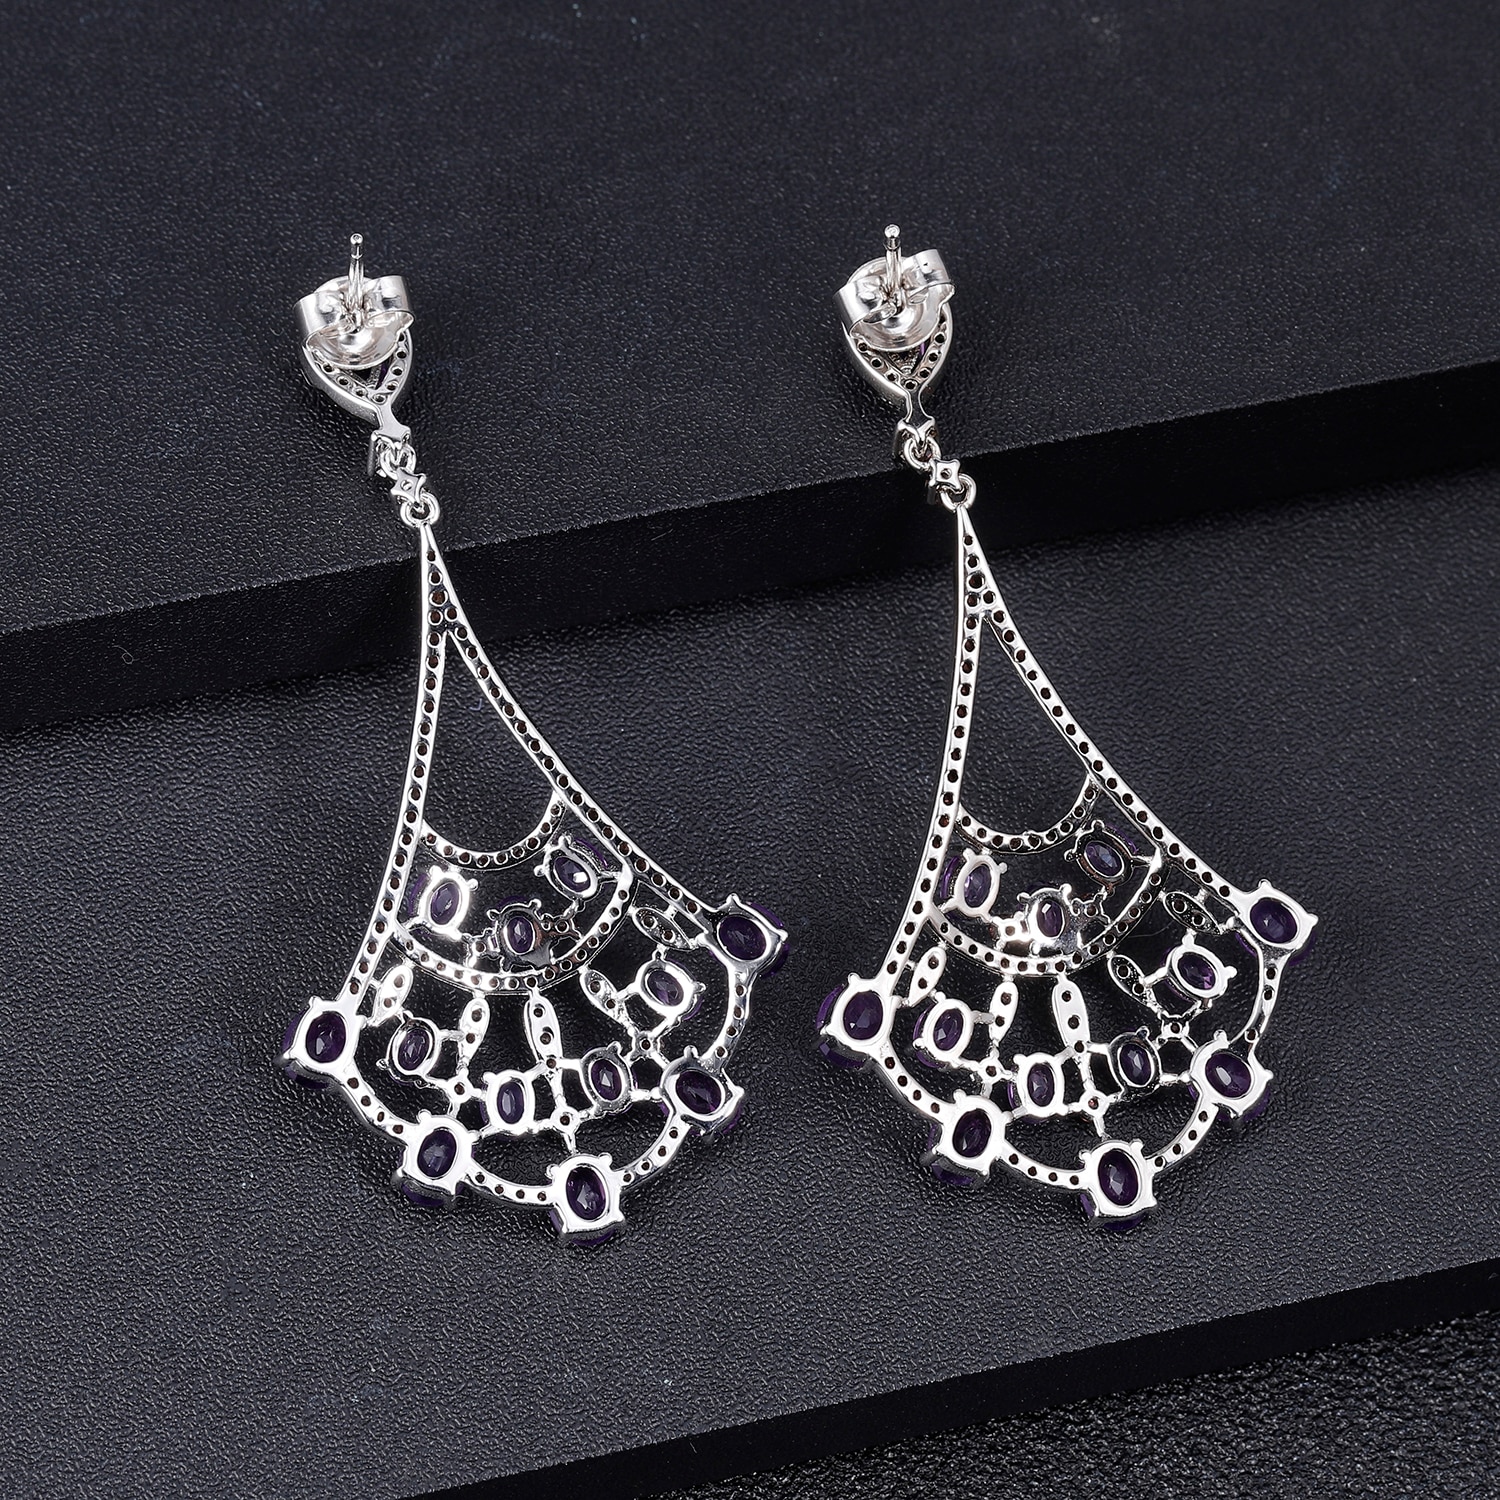 shop with crypto buy GEM S BALLET 7 17Ct Natural Amethyst Earrings 925 Sterling Sliver Ethnic Gypsy Statement Dangle Earrings For Women Fine Jewelry pay with bitcoin